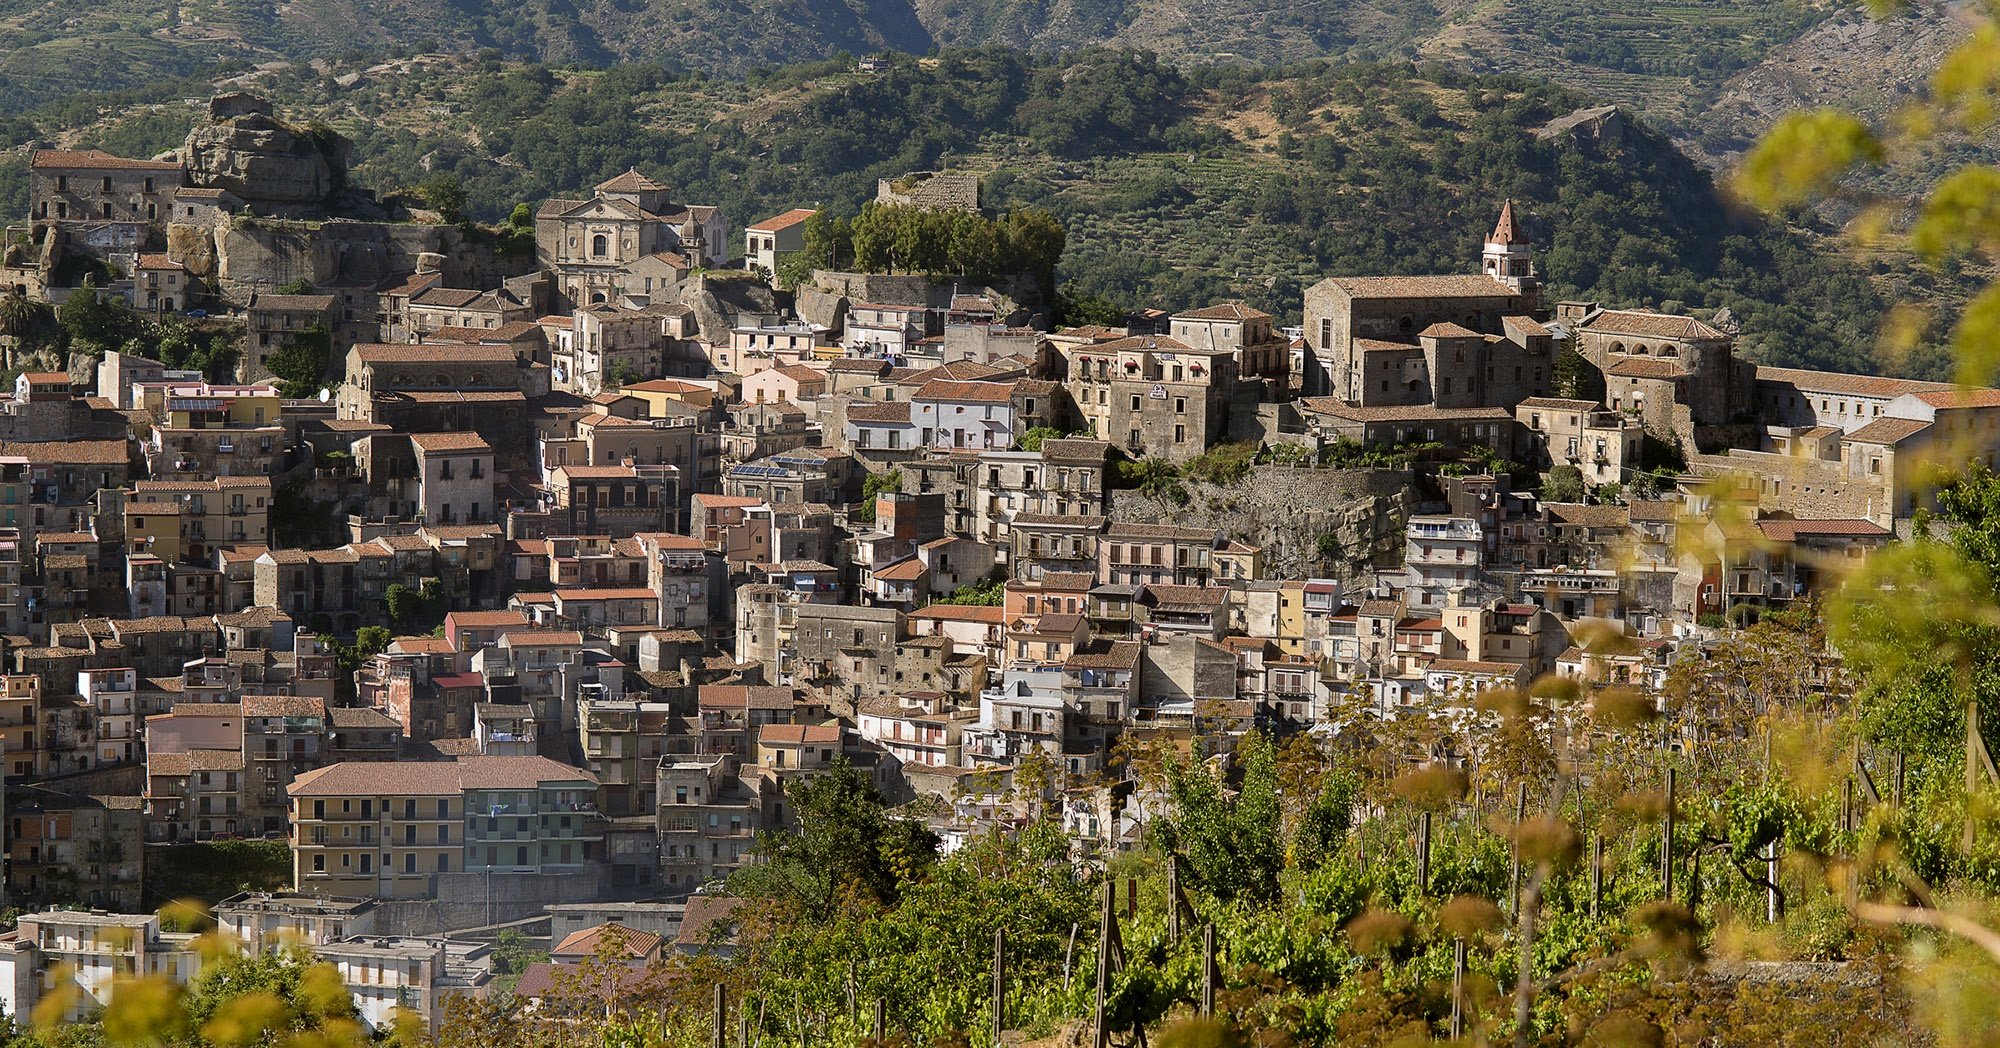 The view from a vineyard in Sicily overlooking a town